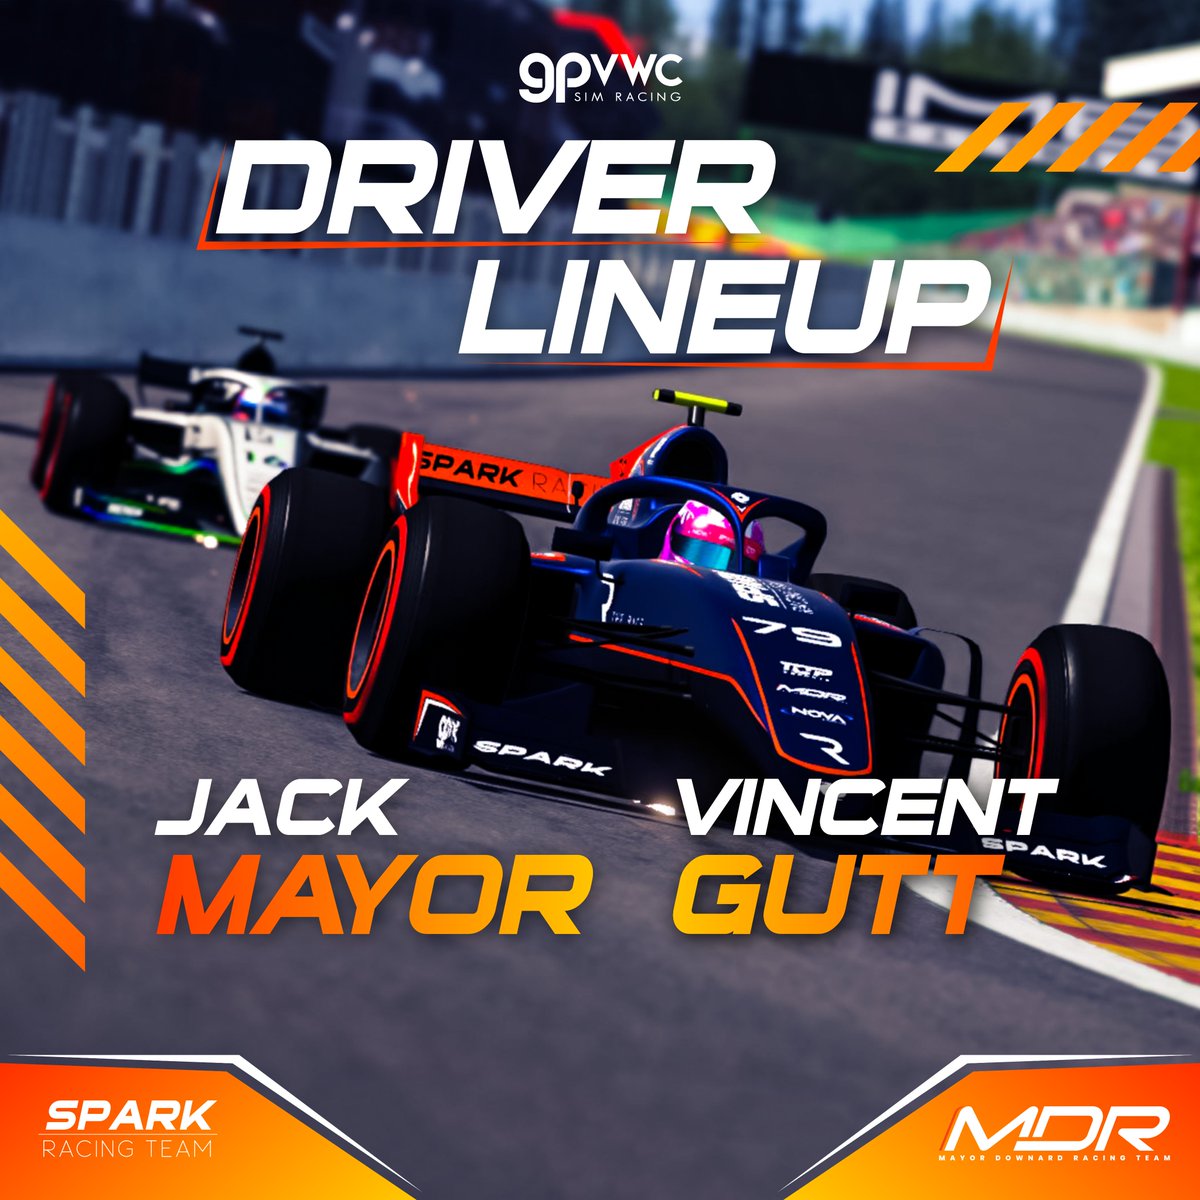 We're excited to announce that the current Formula Sprint 1 champion, Jack Mayor, will be joining our team for the upcoming season in the @gpvwc Superlights championship. #gpvwc #SL2 #simracing #racing #esports #spark #AnnounceMayor